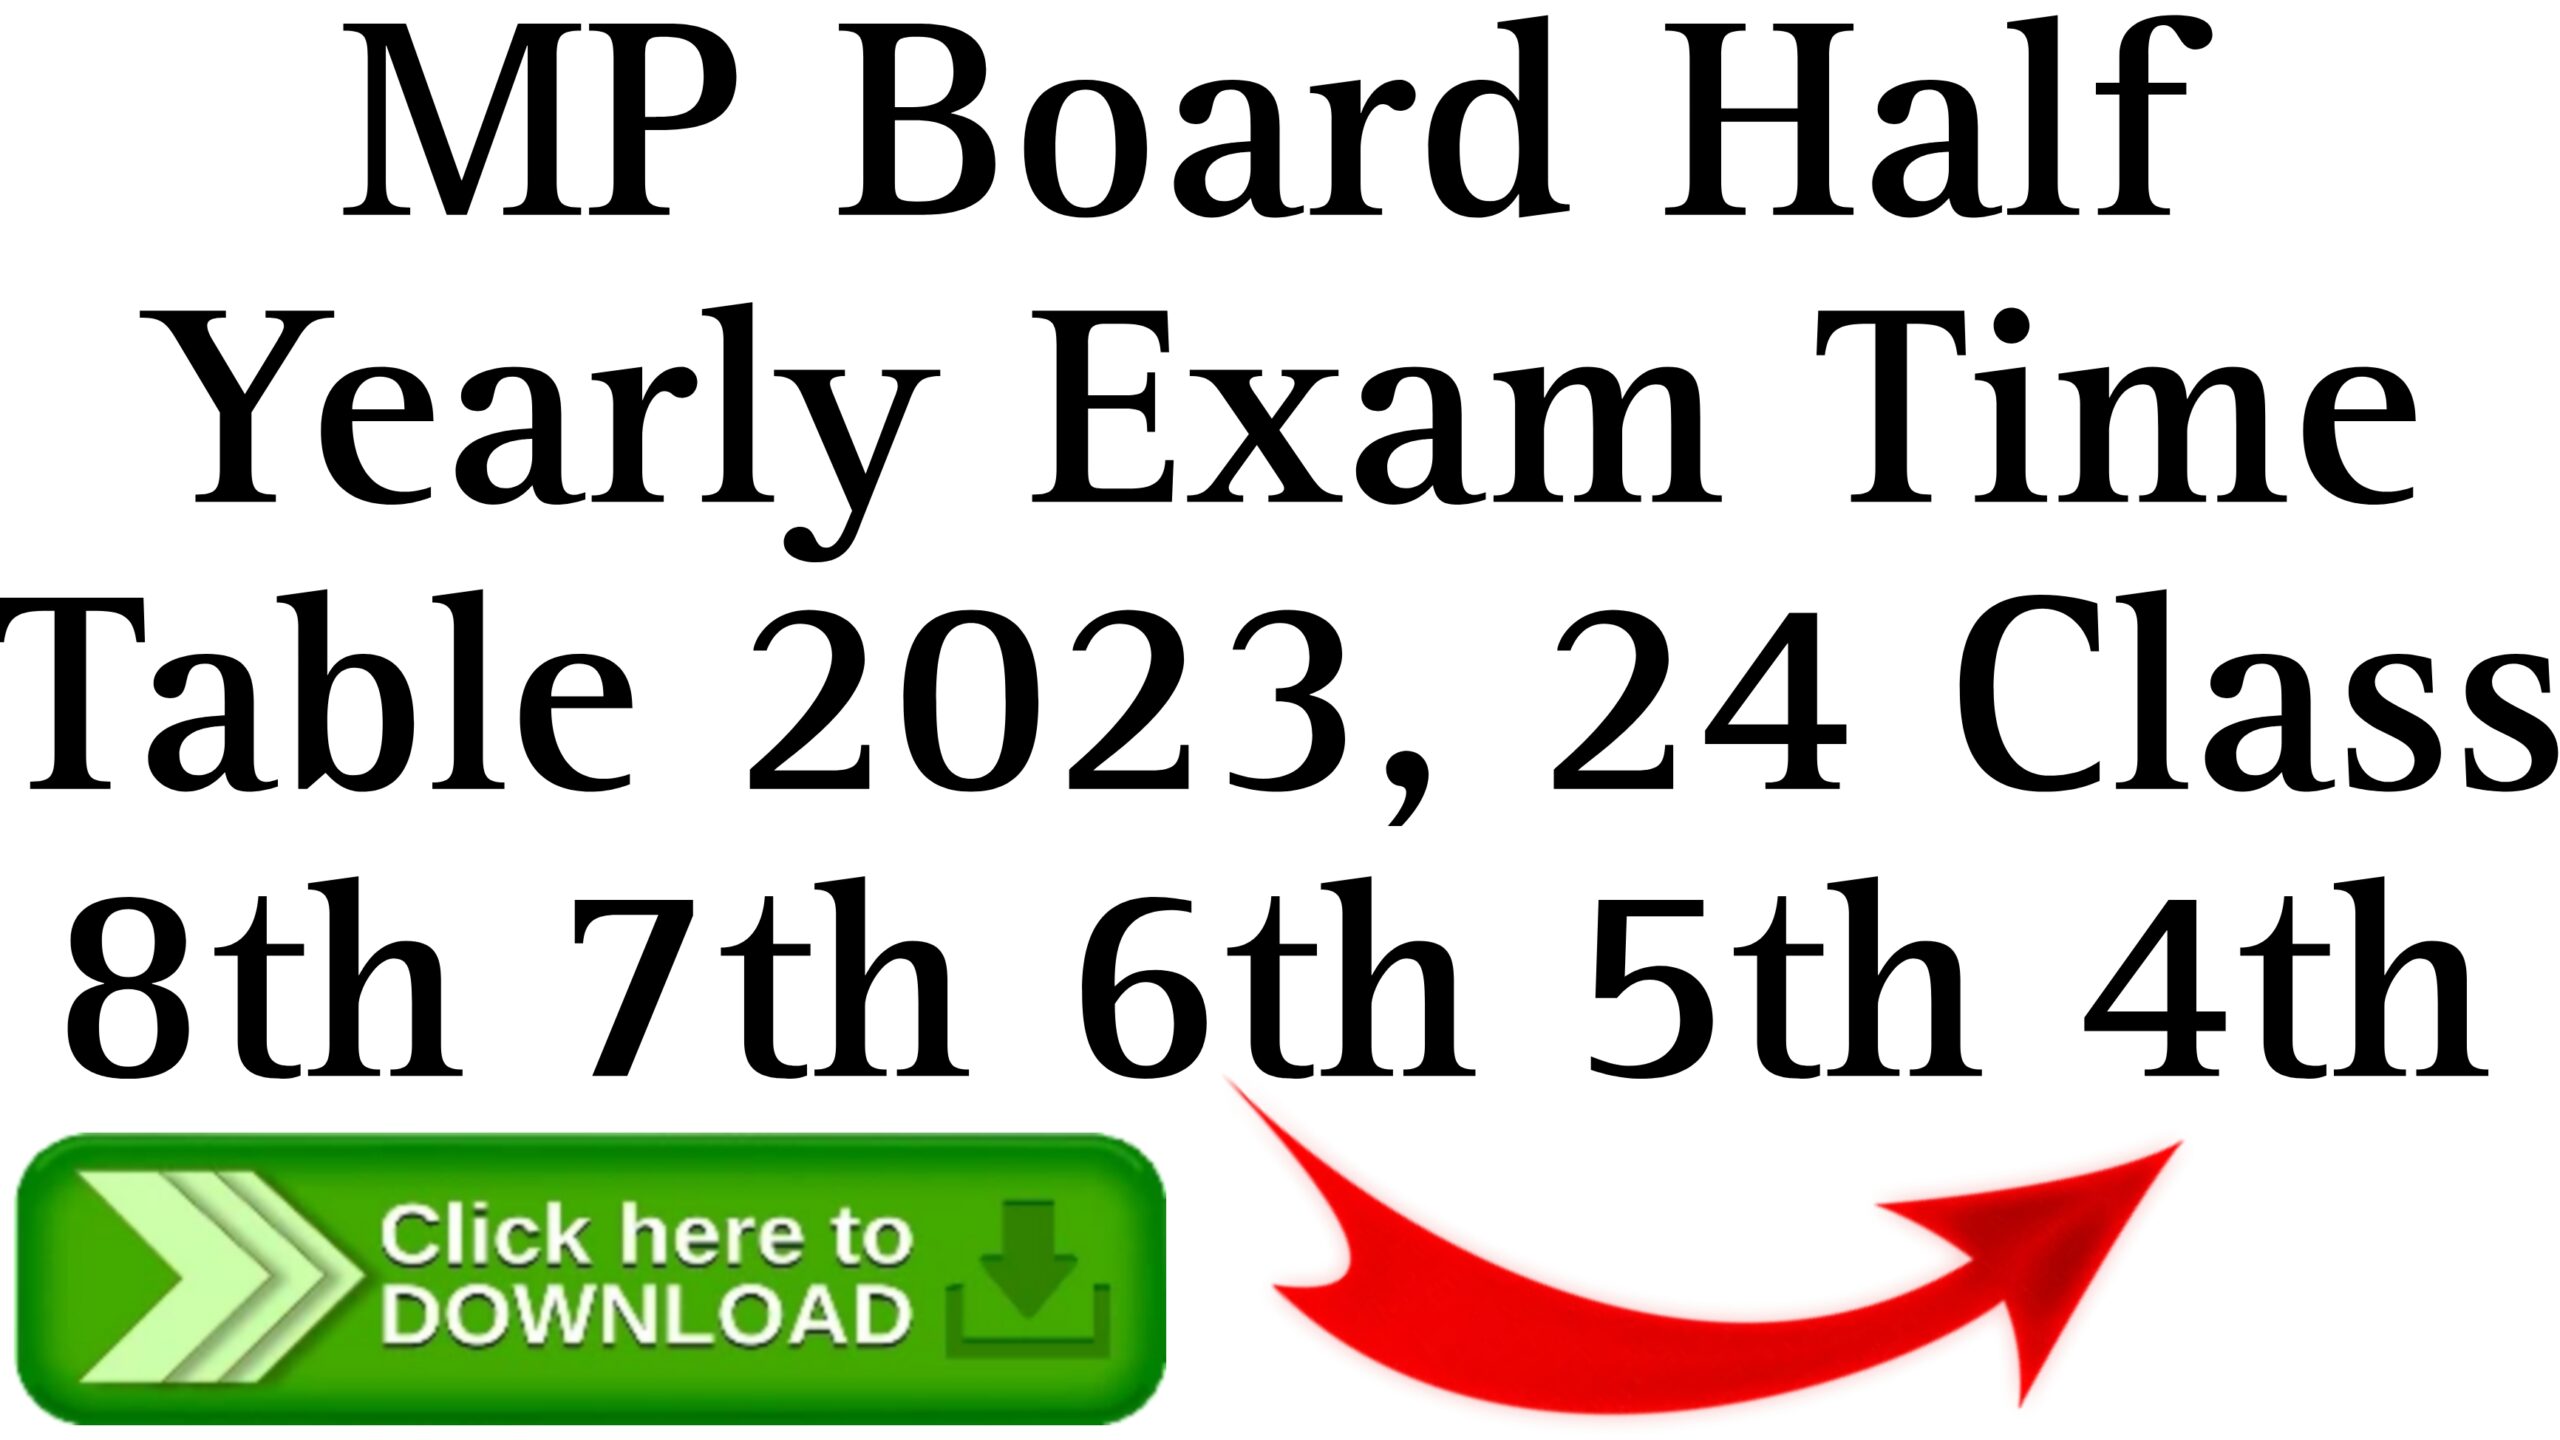 MP Board Half Yearly Exam Time Table 2023 Class 8th 7th 6th 5th 4th